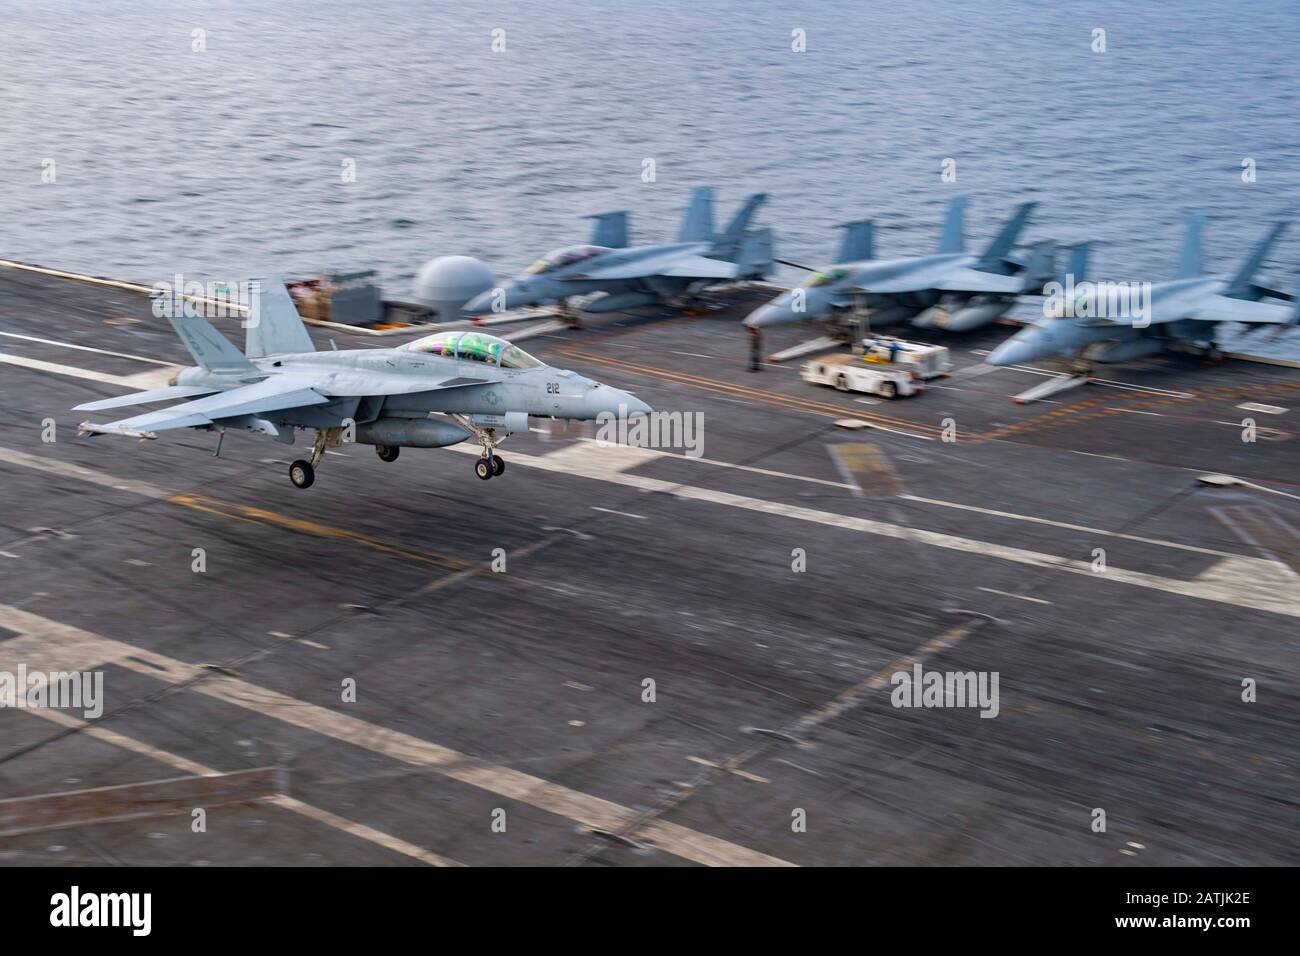 A U.S. Navy F/A-18F Super Hornet fighter aircraft attached to Strike Fighter Squadron 211, lands on the flight deck of the aircraft carrier USS Harry S. Truman following a routine patrol December 29, 2019 in the Arabian Sea. Stock Photo